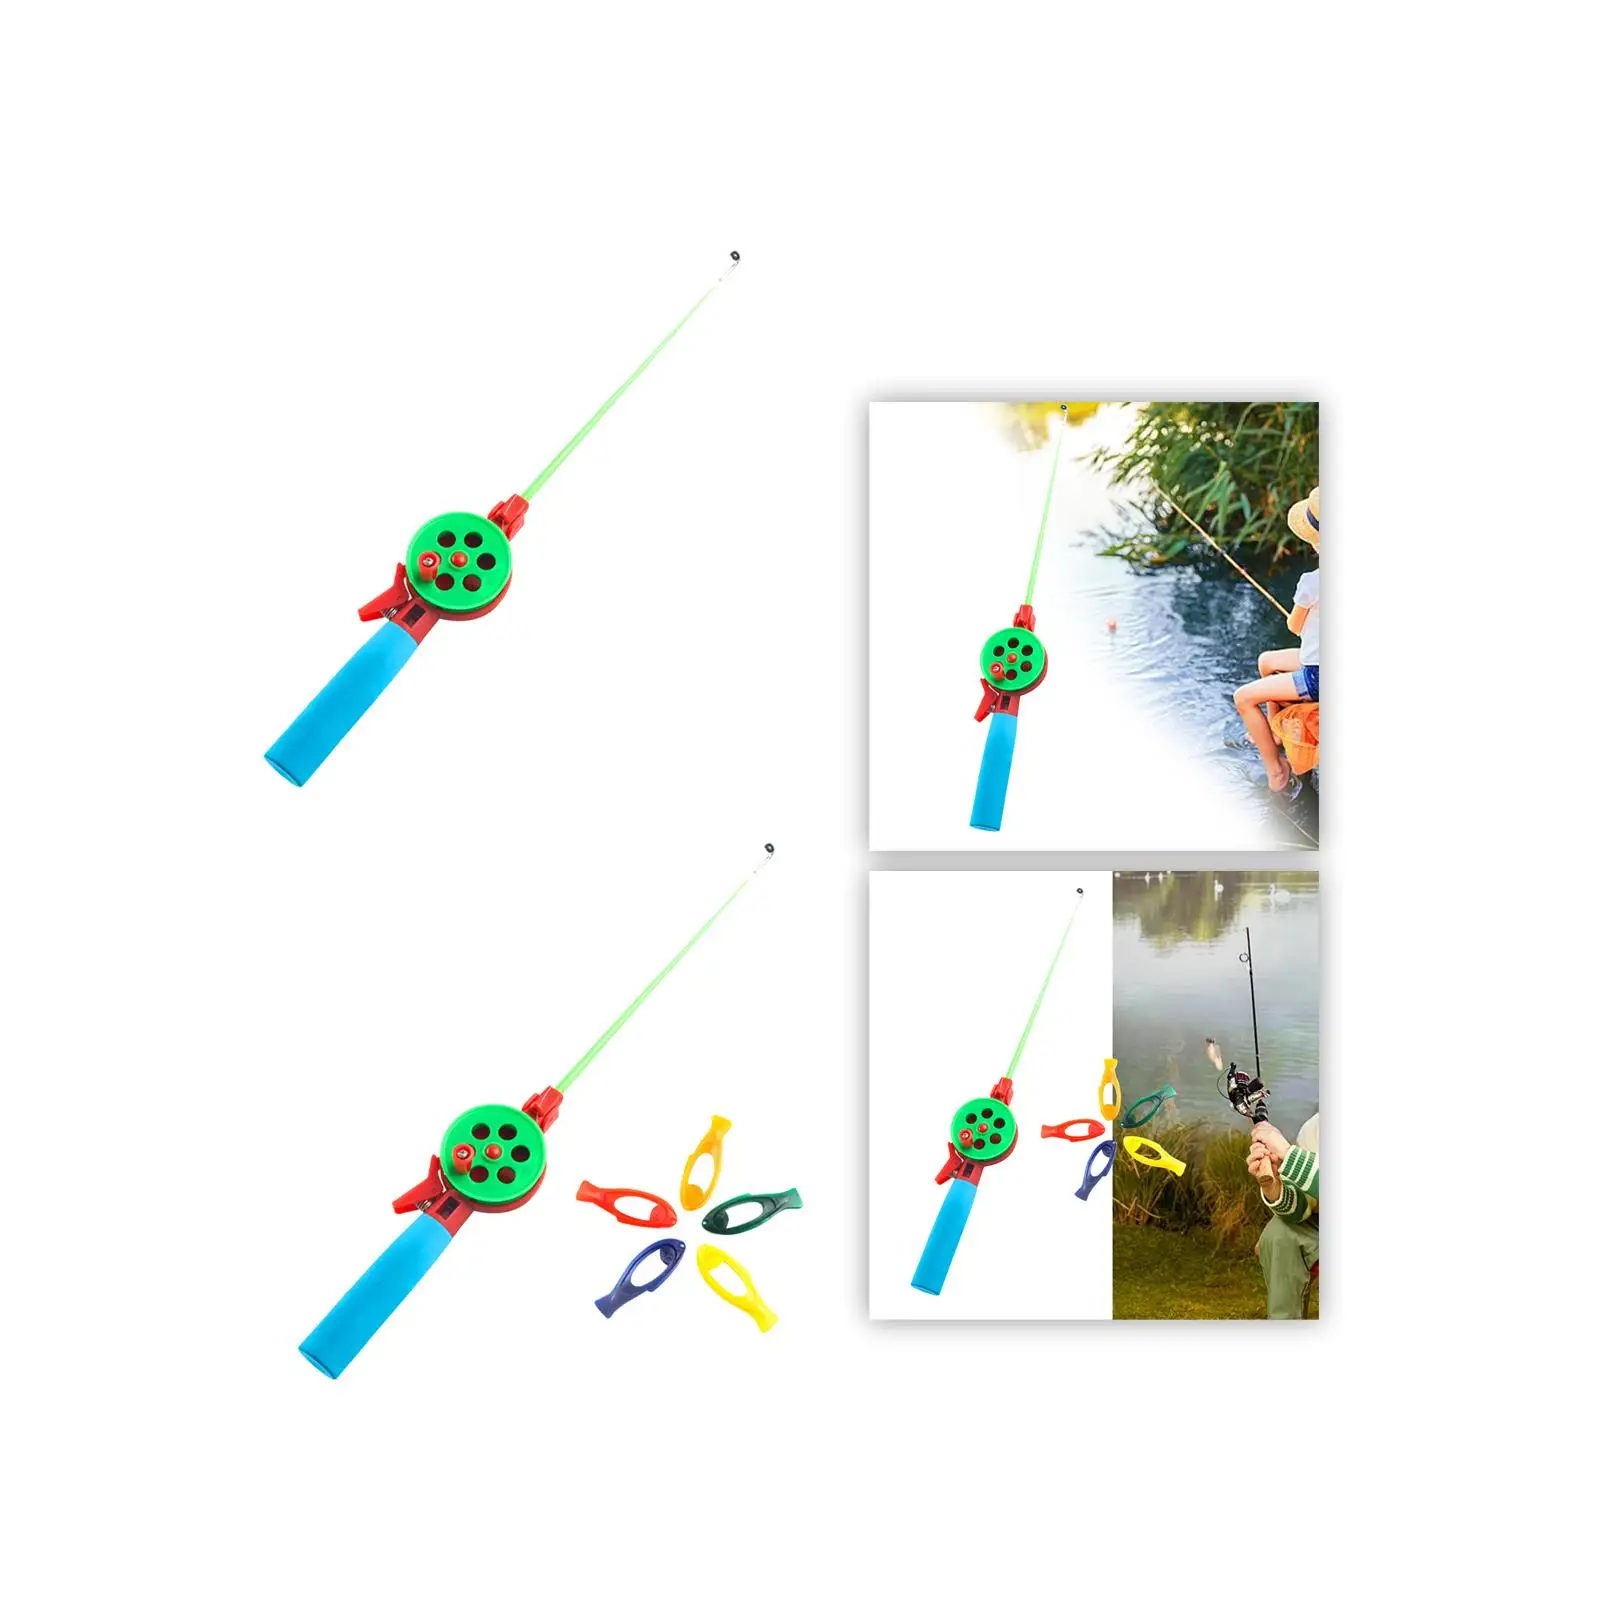 Short Ice Fishing Rod Accessories Miniature Short Section Winter Mini Fishing Pole for Outdoor Fishing Holiday Beach Kids